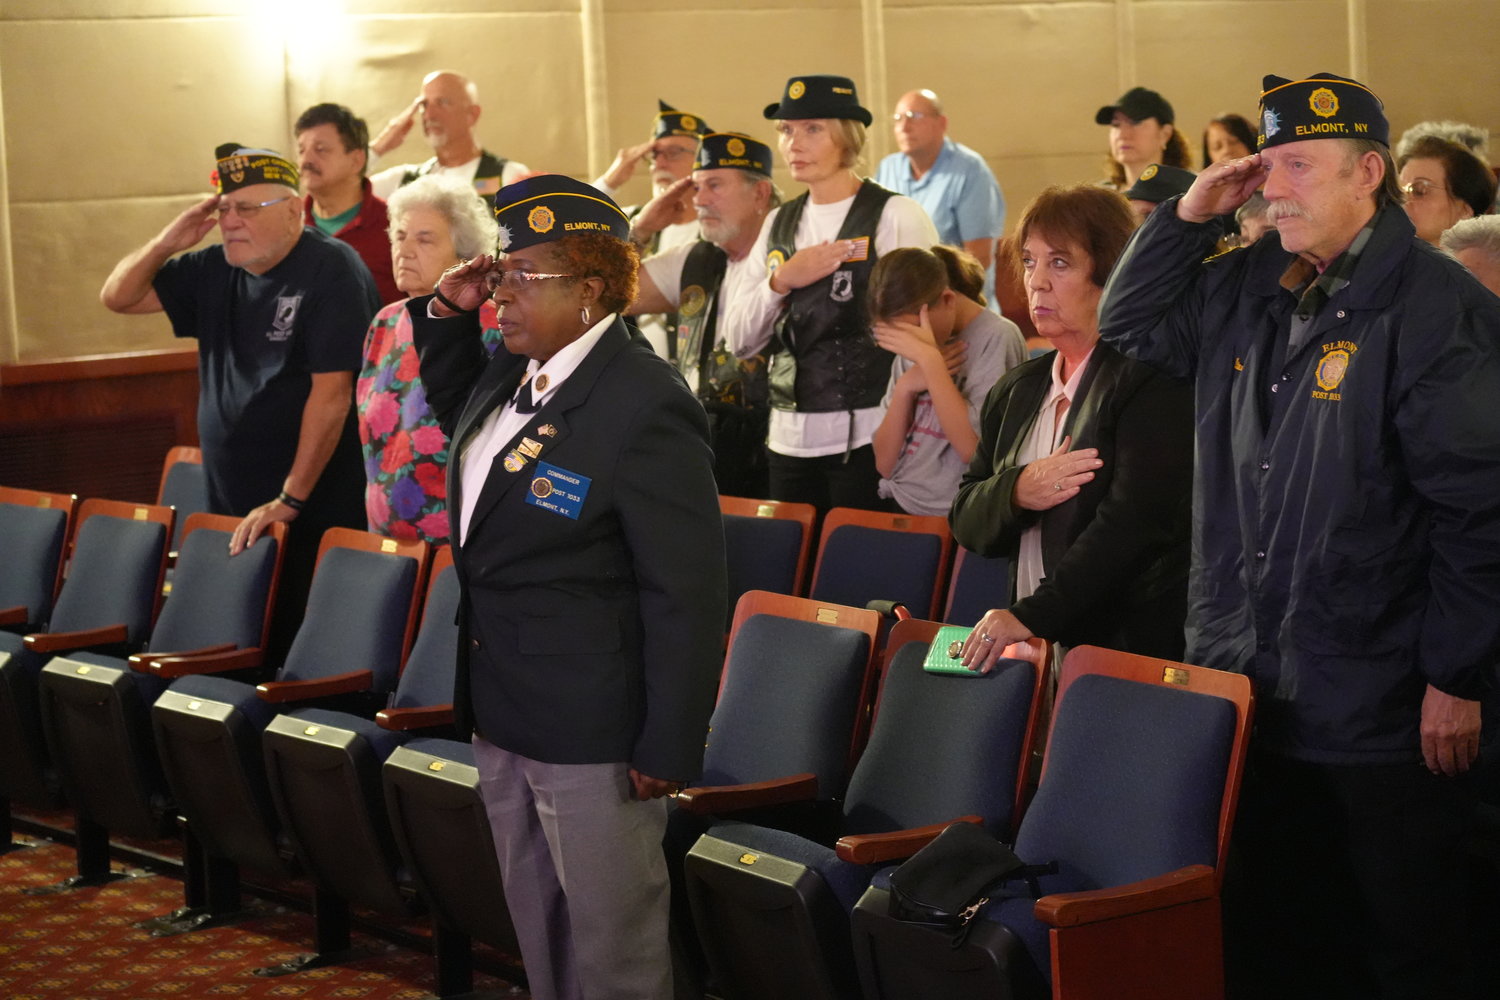 Elmont VFW Post 1033 was in attendance for the special Veterans Day concert.